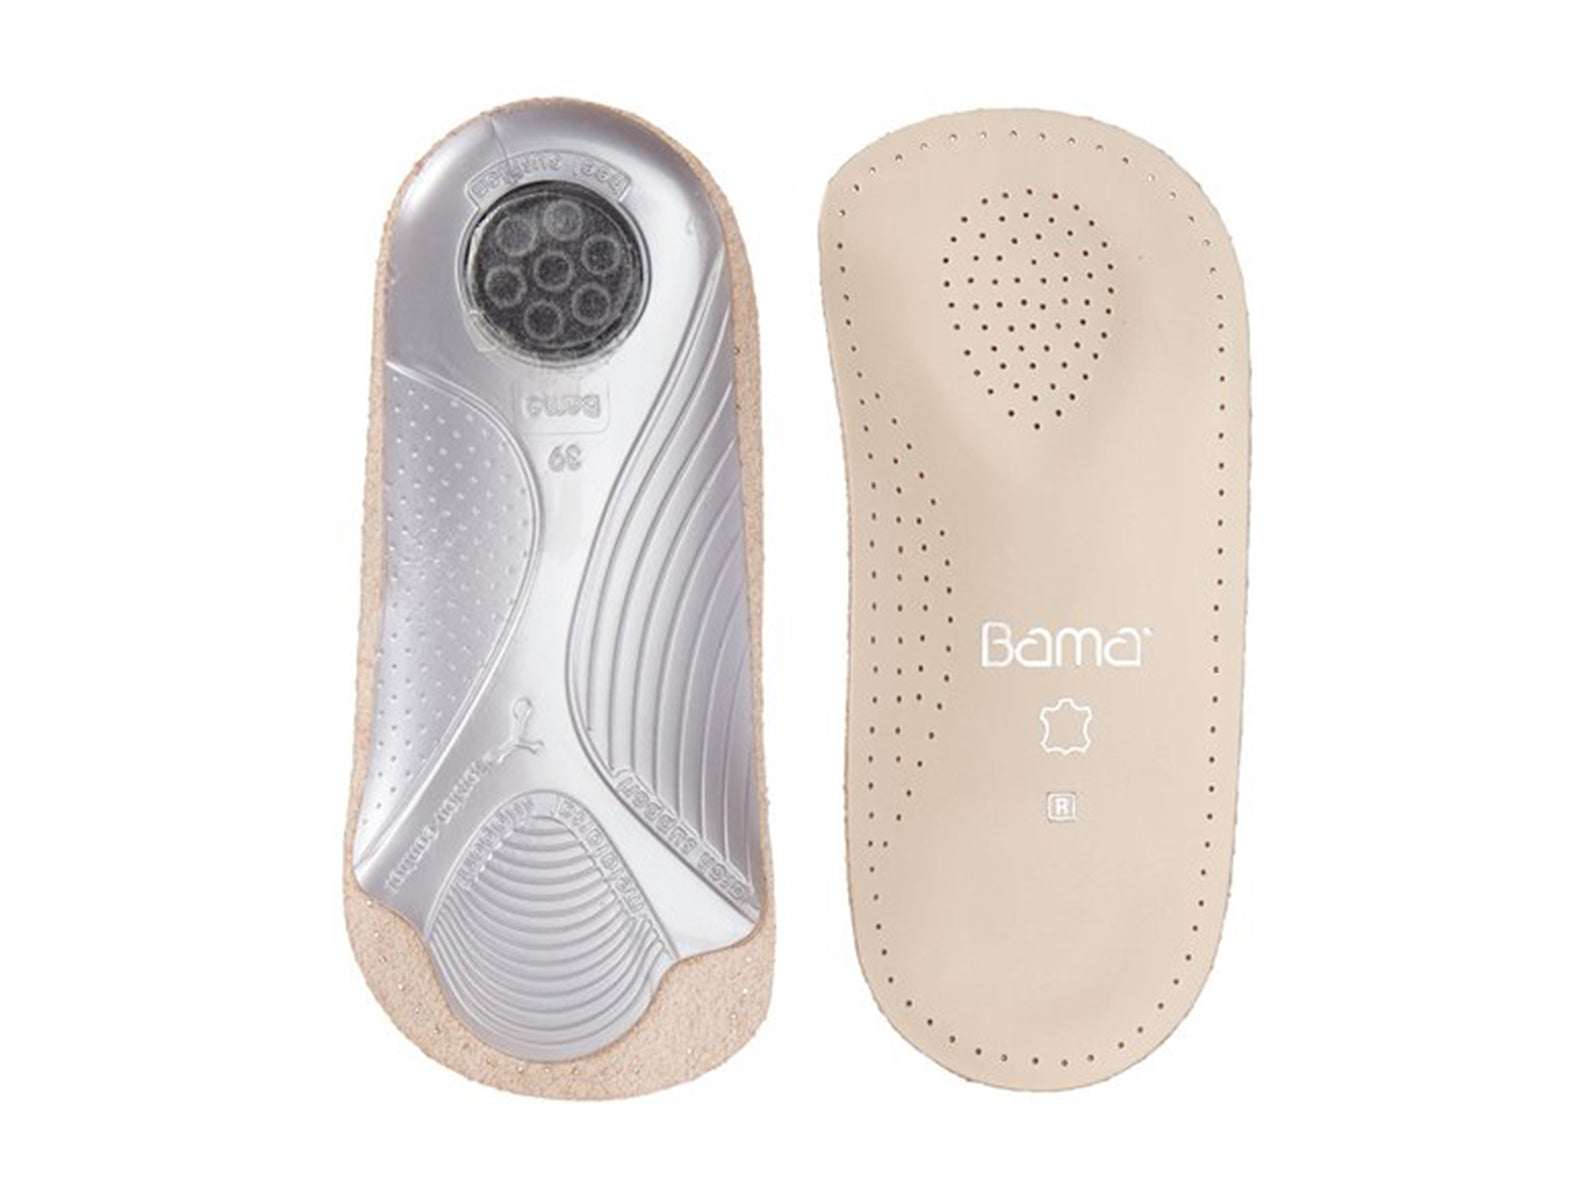 restjes Productief veelbelovend Bama Comfort Futura | Anatomically Shaped Leather Insole Arch Support |  Shoe Care Products at Walsh Brothers Shoes